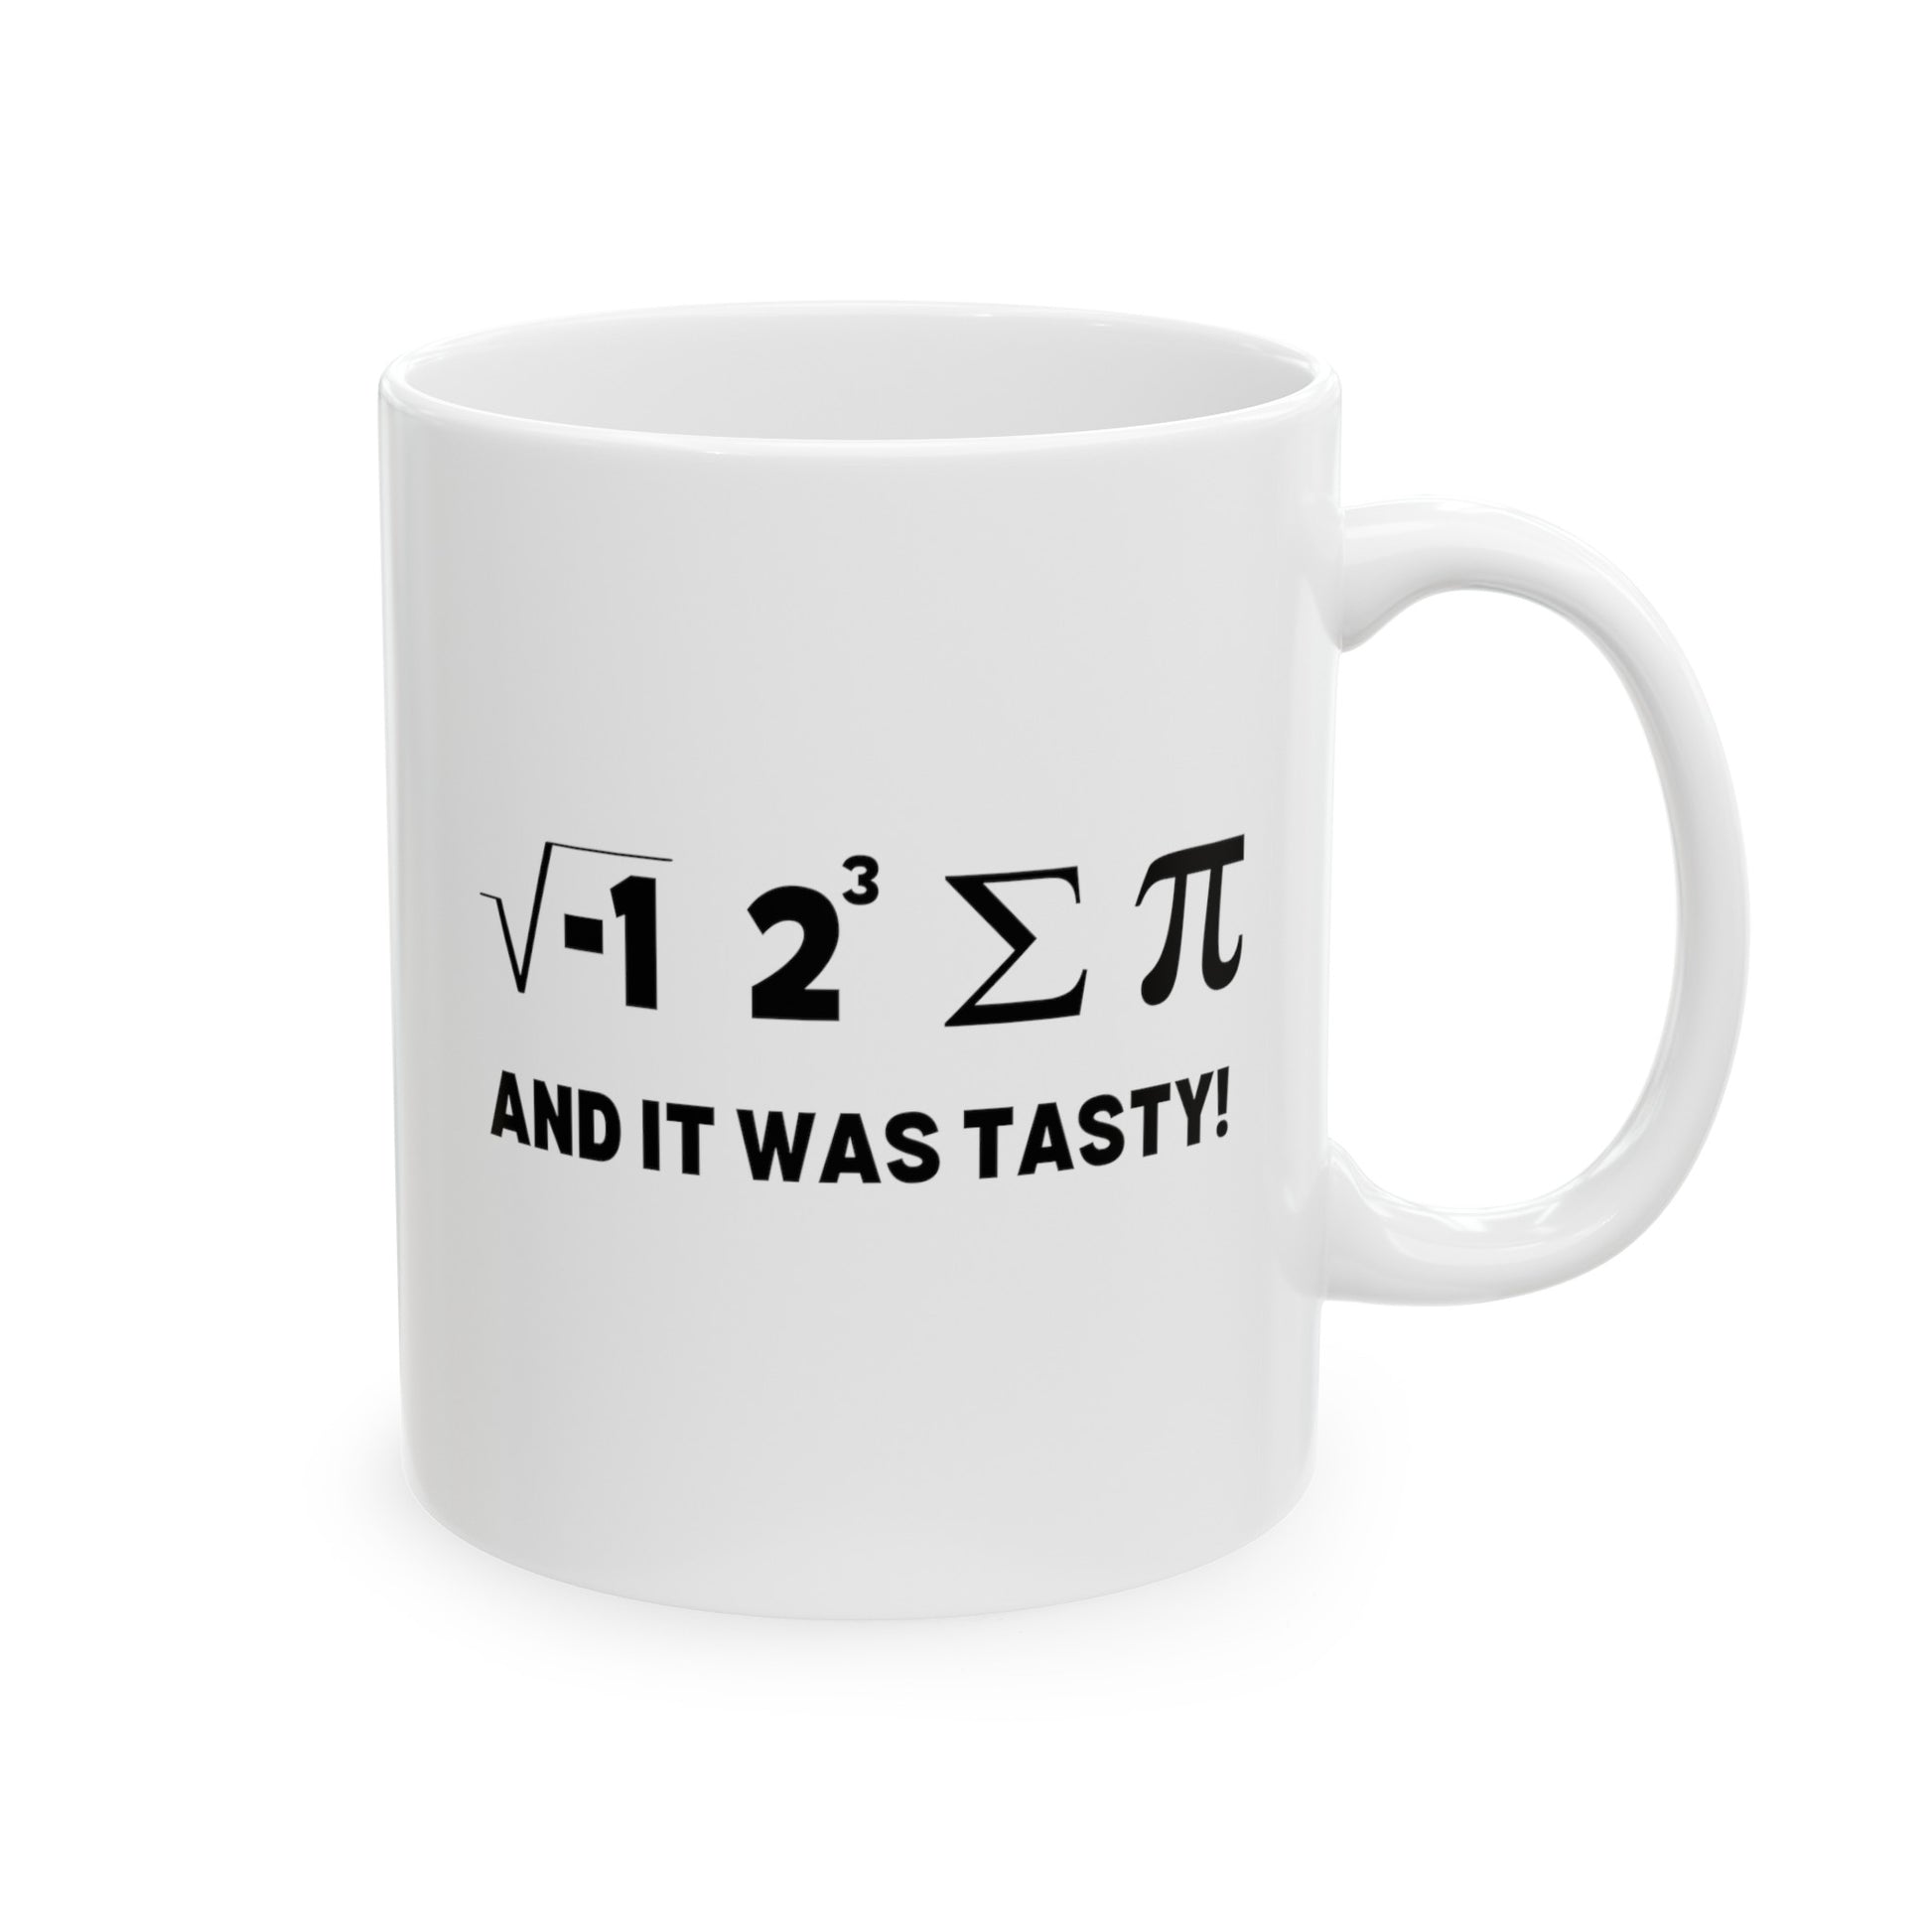 I Ate Some Pie And It Was Tasty 11oz white funny large coffee mug gift for math lover teacher geek nerdy science nerd novelty equations formula pun waveywares wavey wares wavywares wavy wares